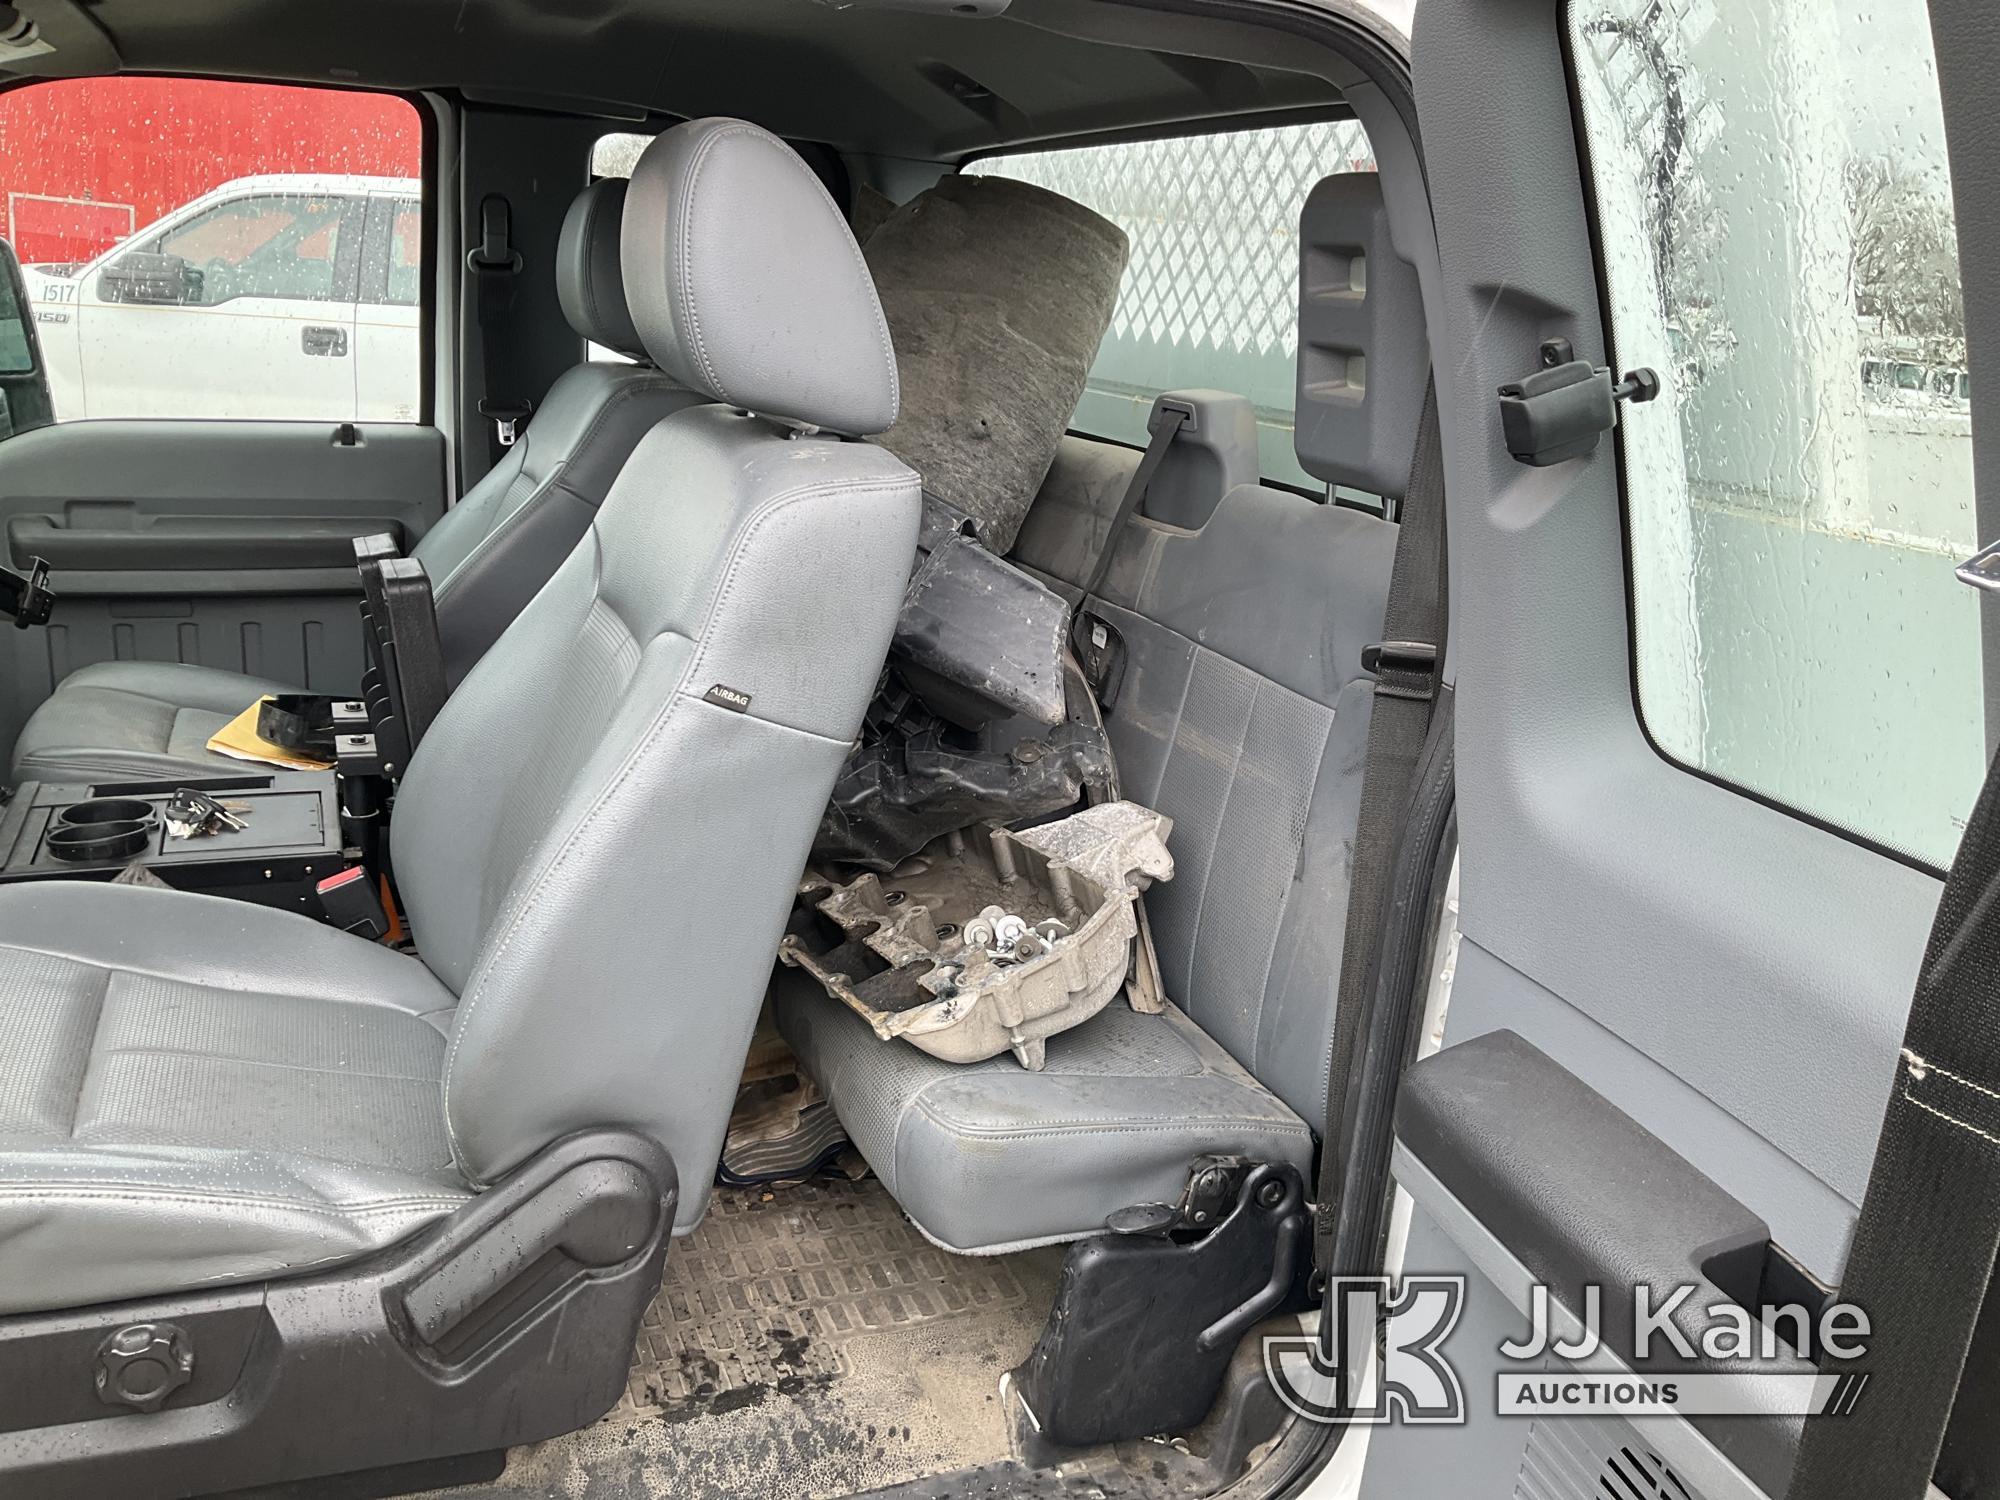 (Hawk Point, MO) 2014 Ford F350 4x4 Extended-Cab Service Truck Not Running, Condition Unknown, Parts